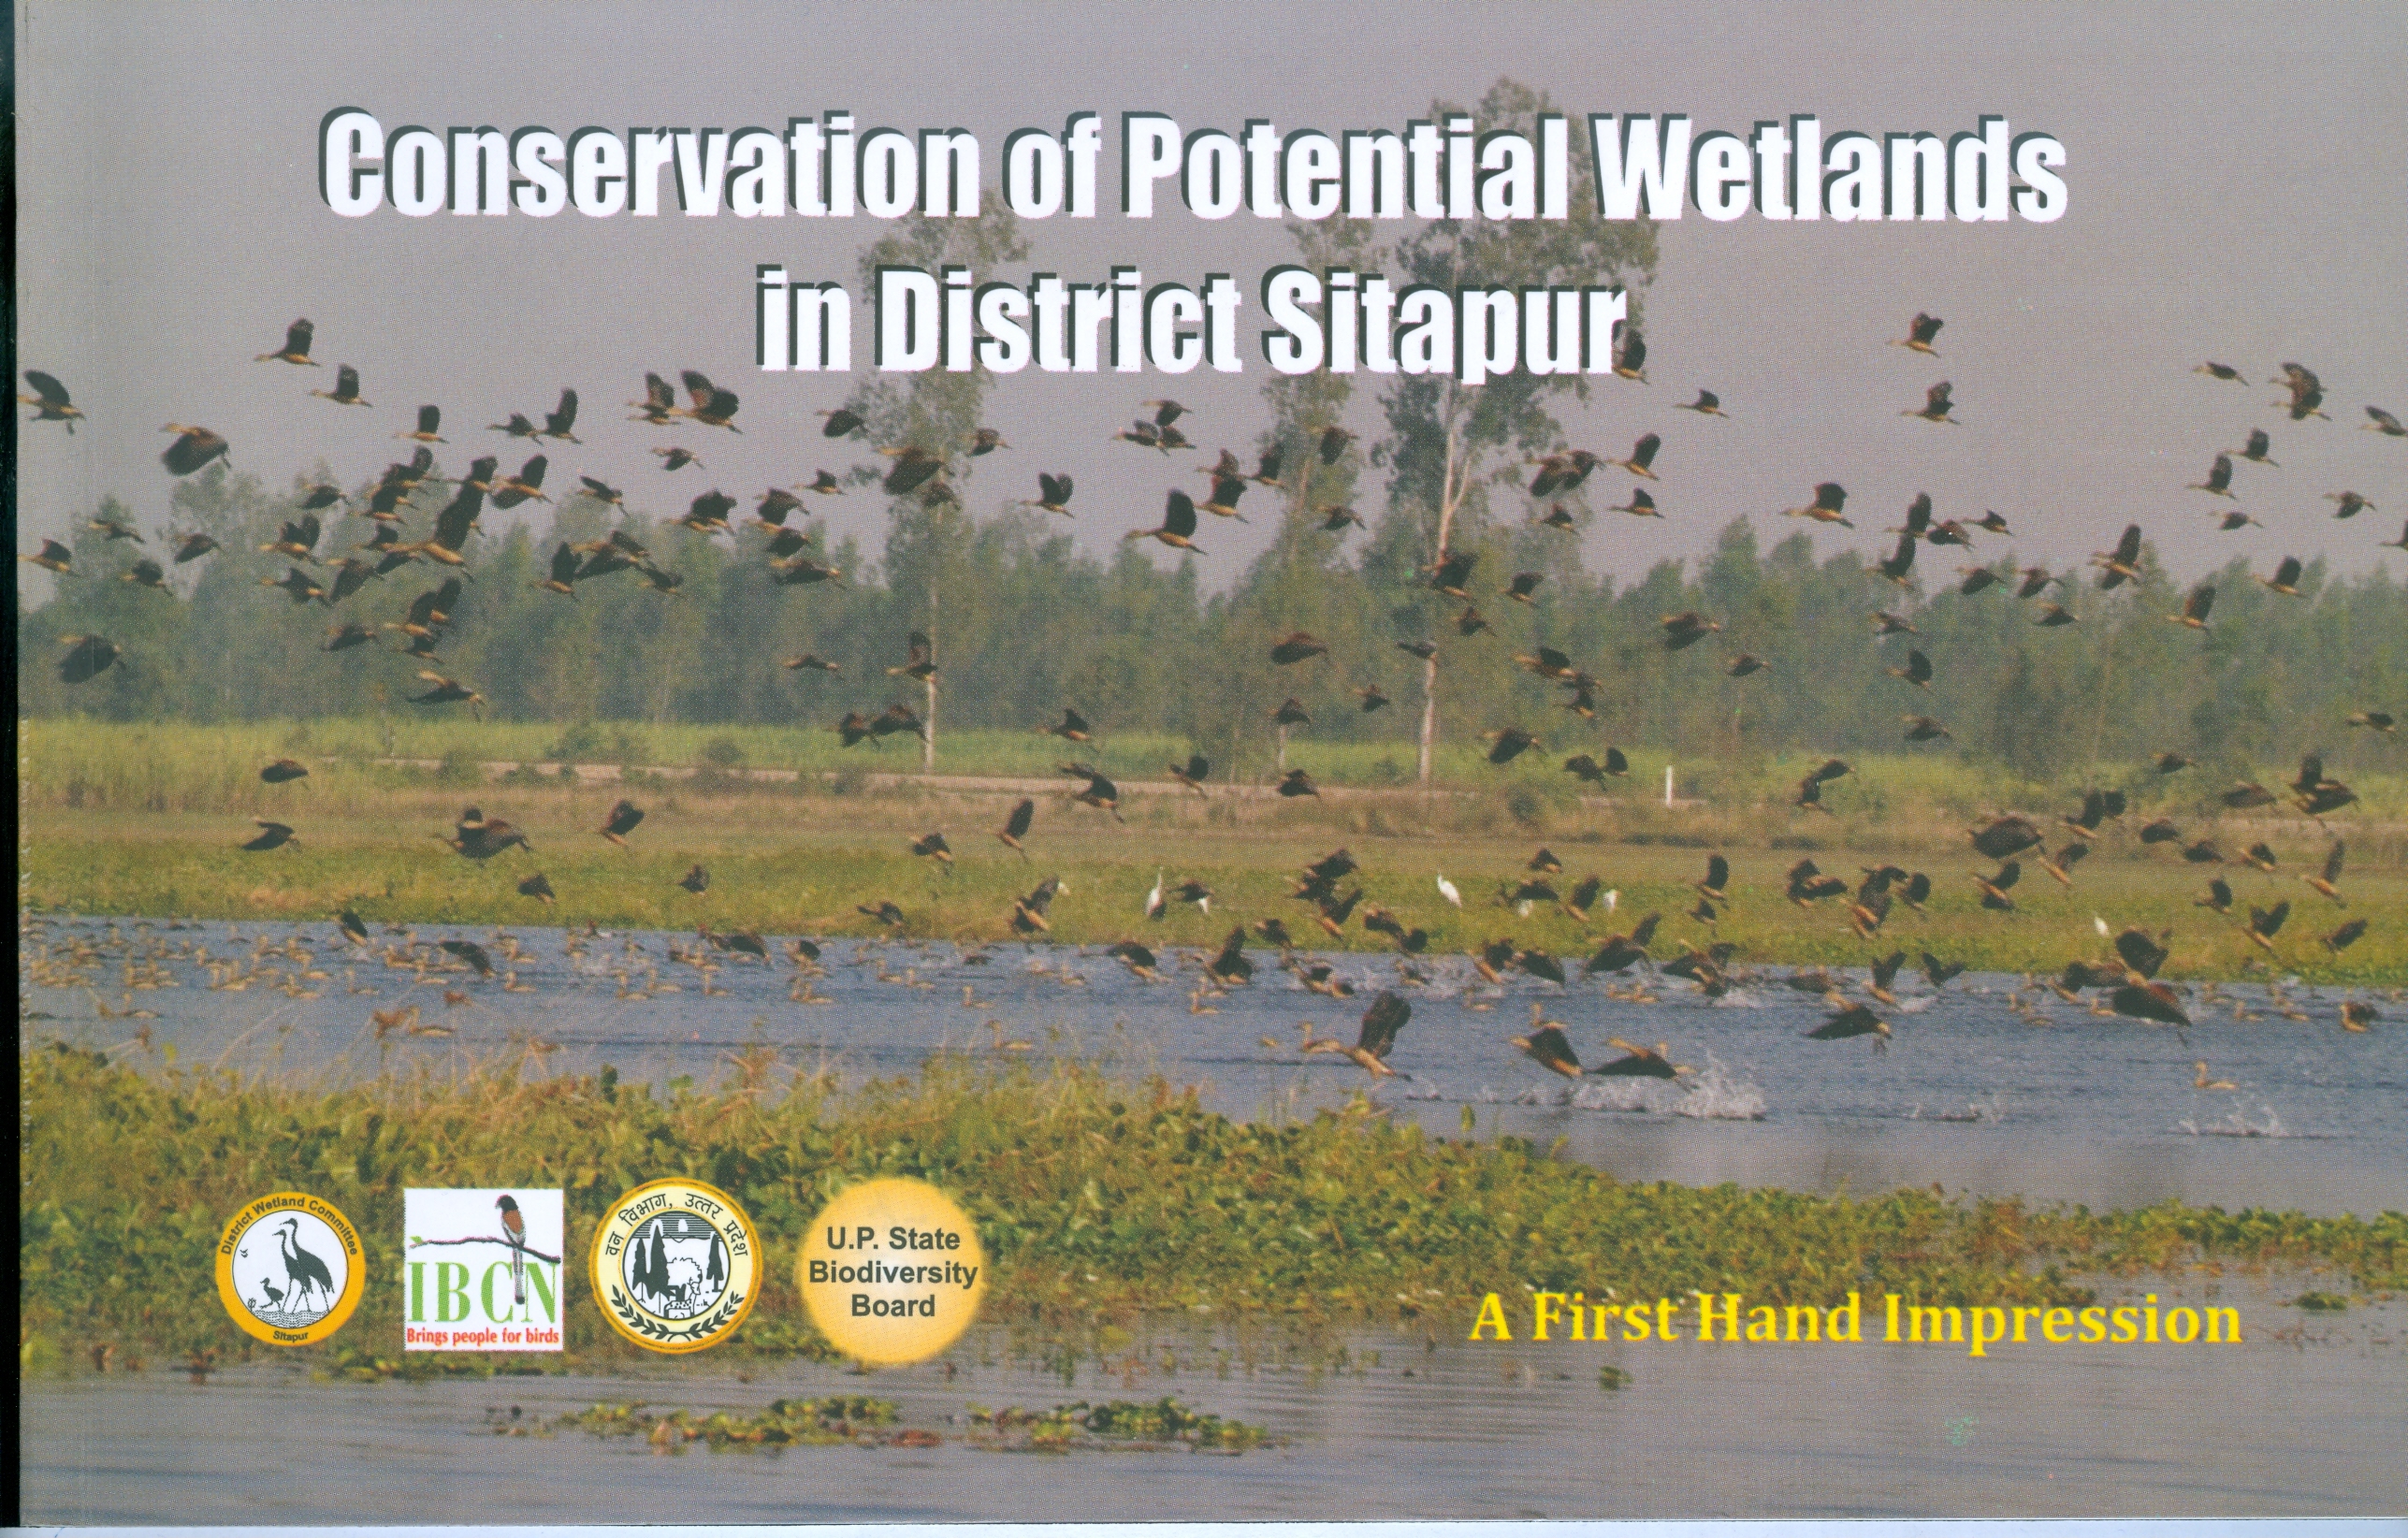 Conservation of Potential Wetlands in Sitapur